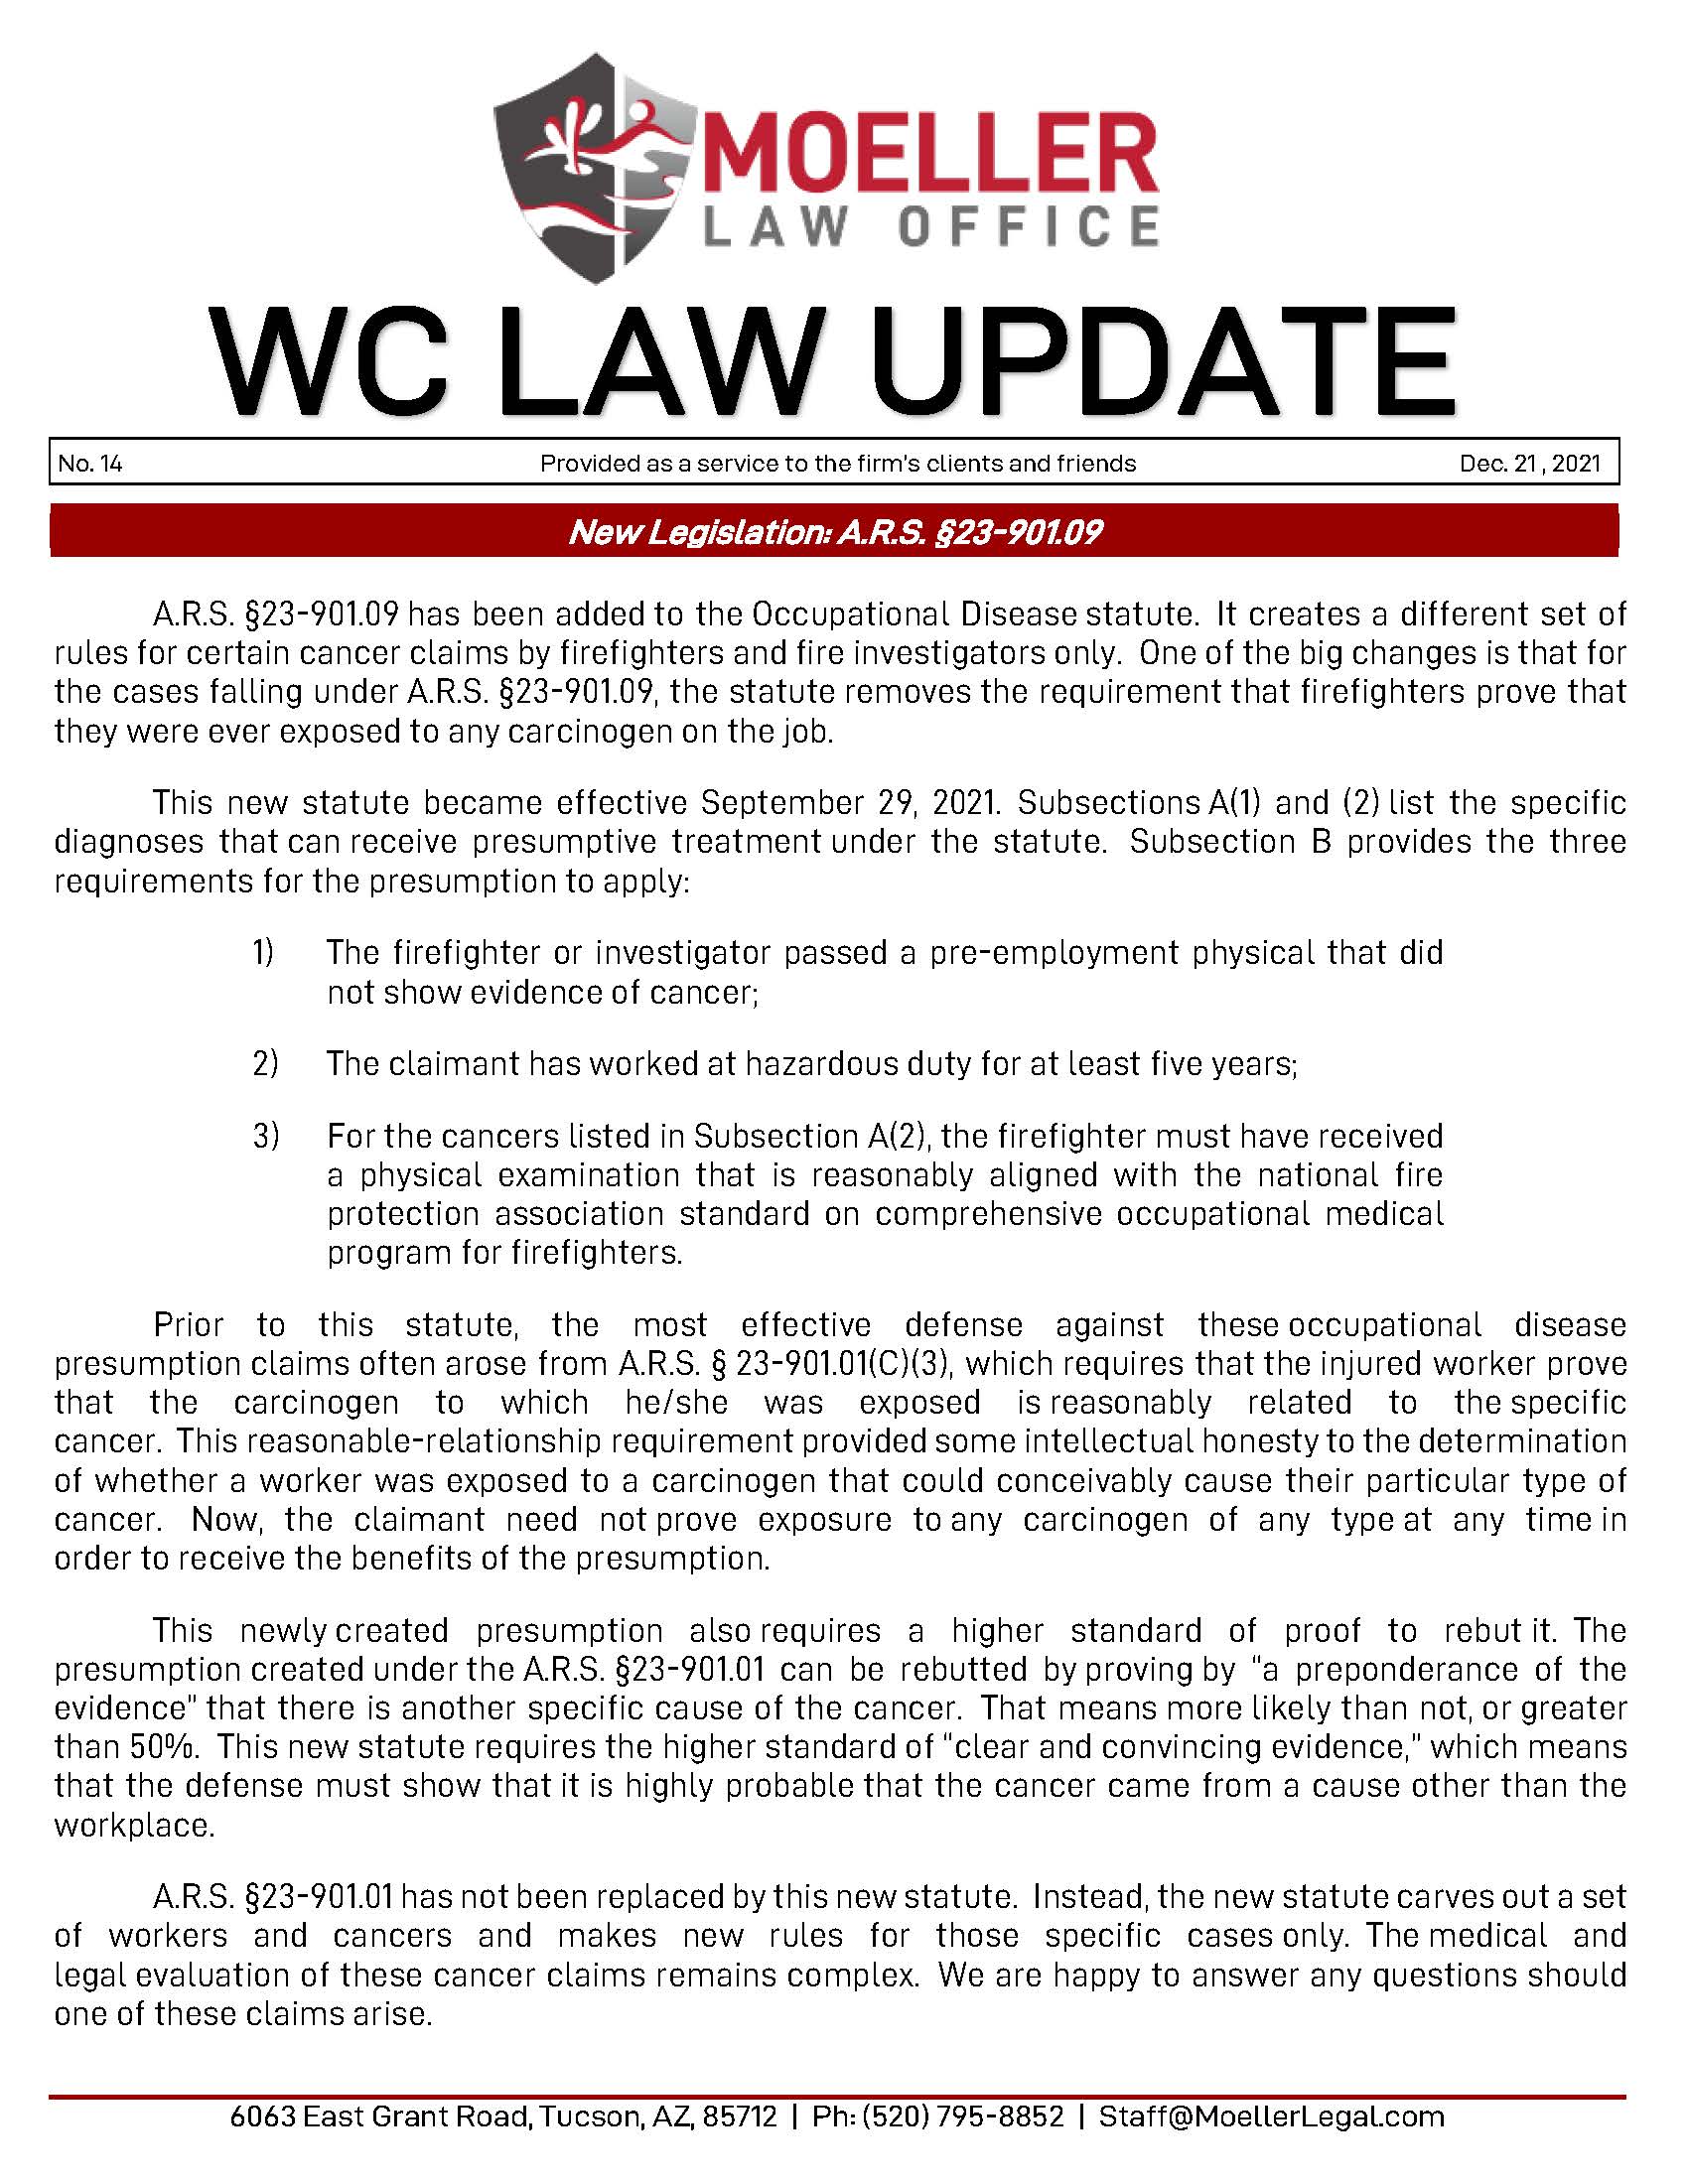 2021 12 21 – No. 14 – WC Law Update – A.R.S. §23-901.09